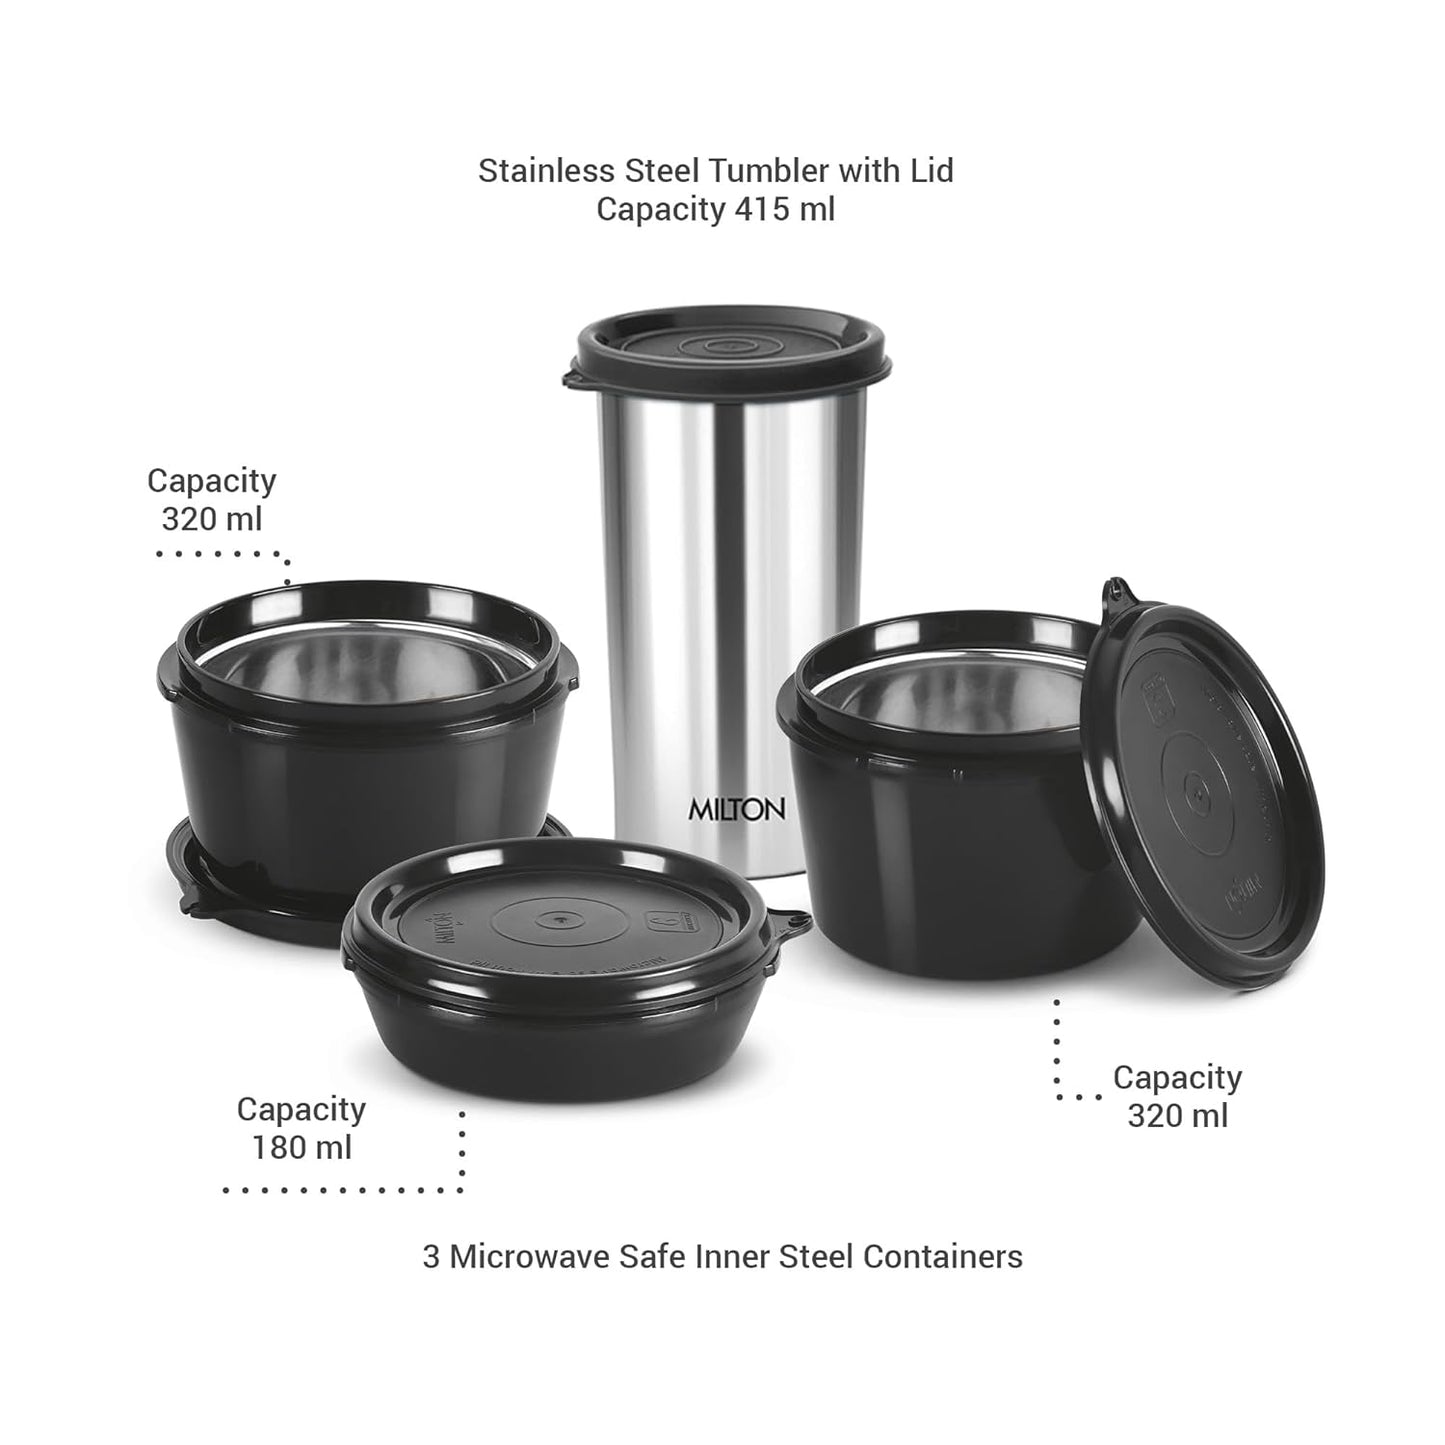 MILTON Floret Tiffin (3 Microwave Safe Inner Steel Containers, 180/320 /320 ml; 1 Stainless Steel Tumbler with Lid, 415 ml) with Insulated Fabric Jacket